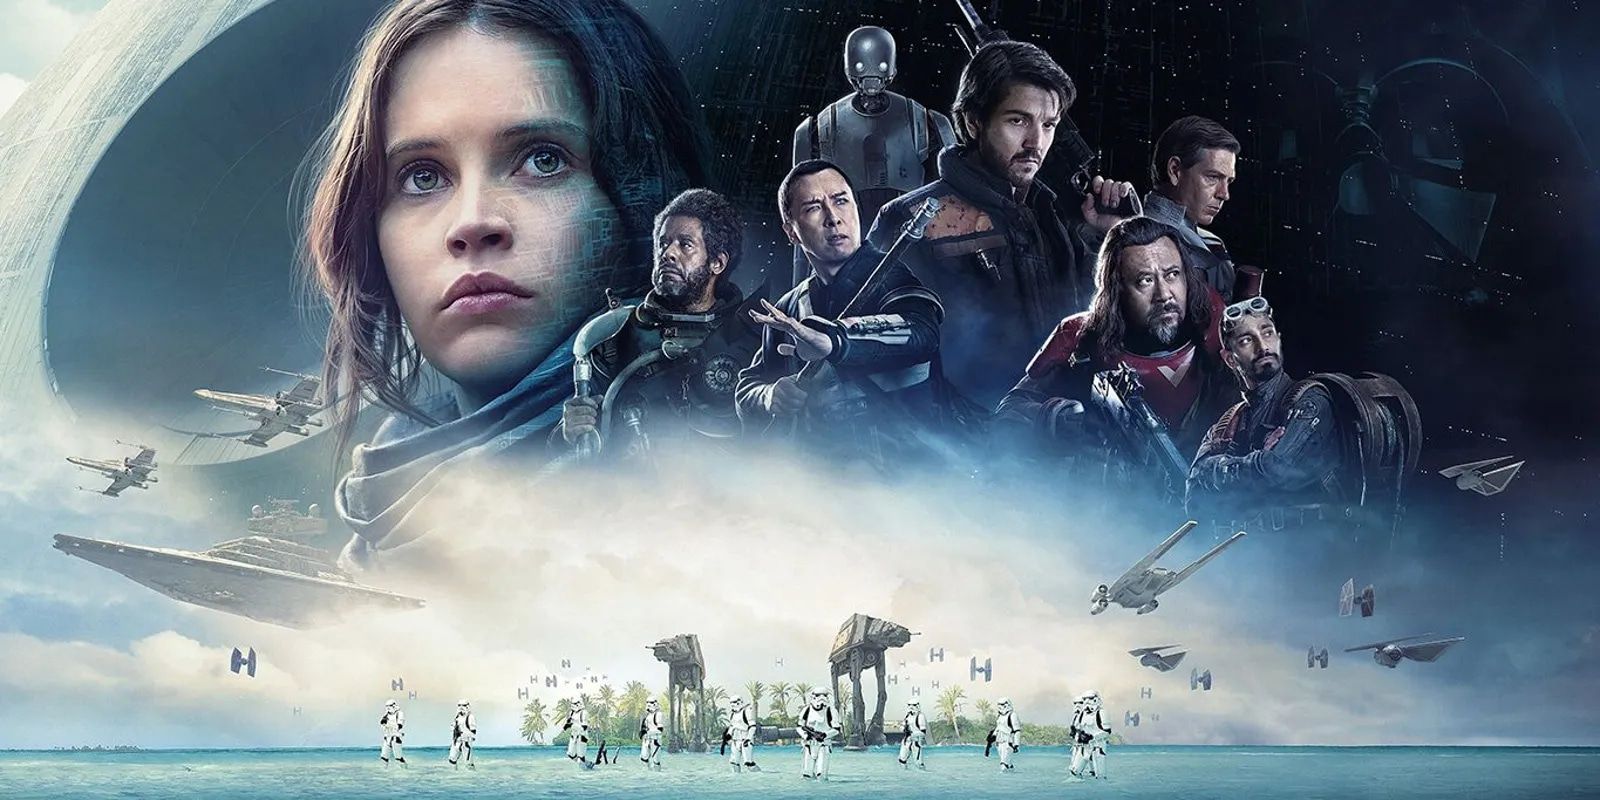 A composite image of all of the main characters featured in Rogue One: A Star Wars Story superimposed over important locations from the film.